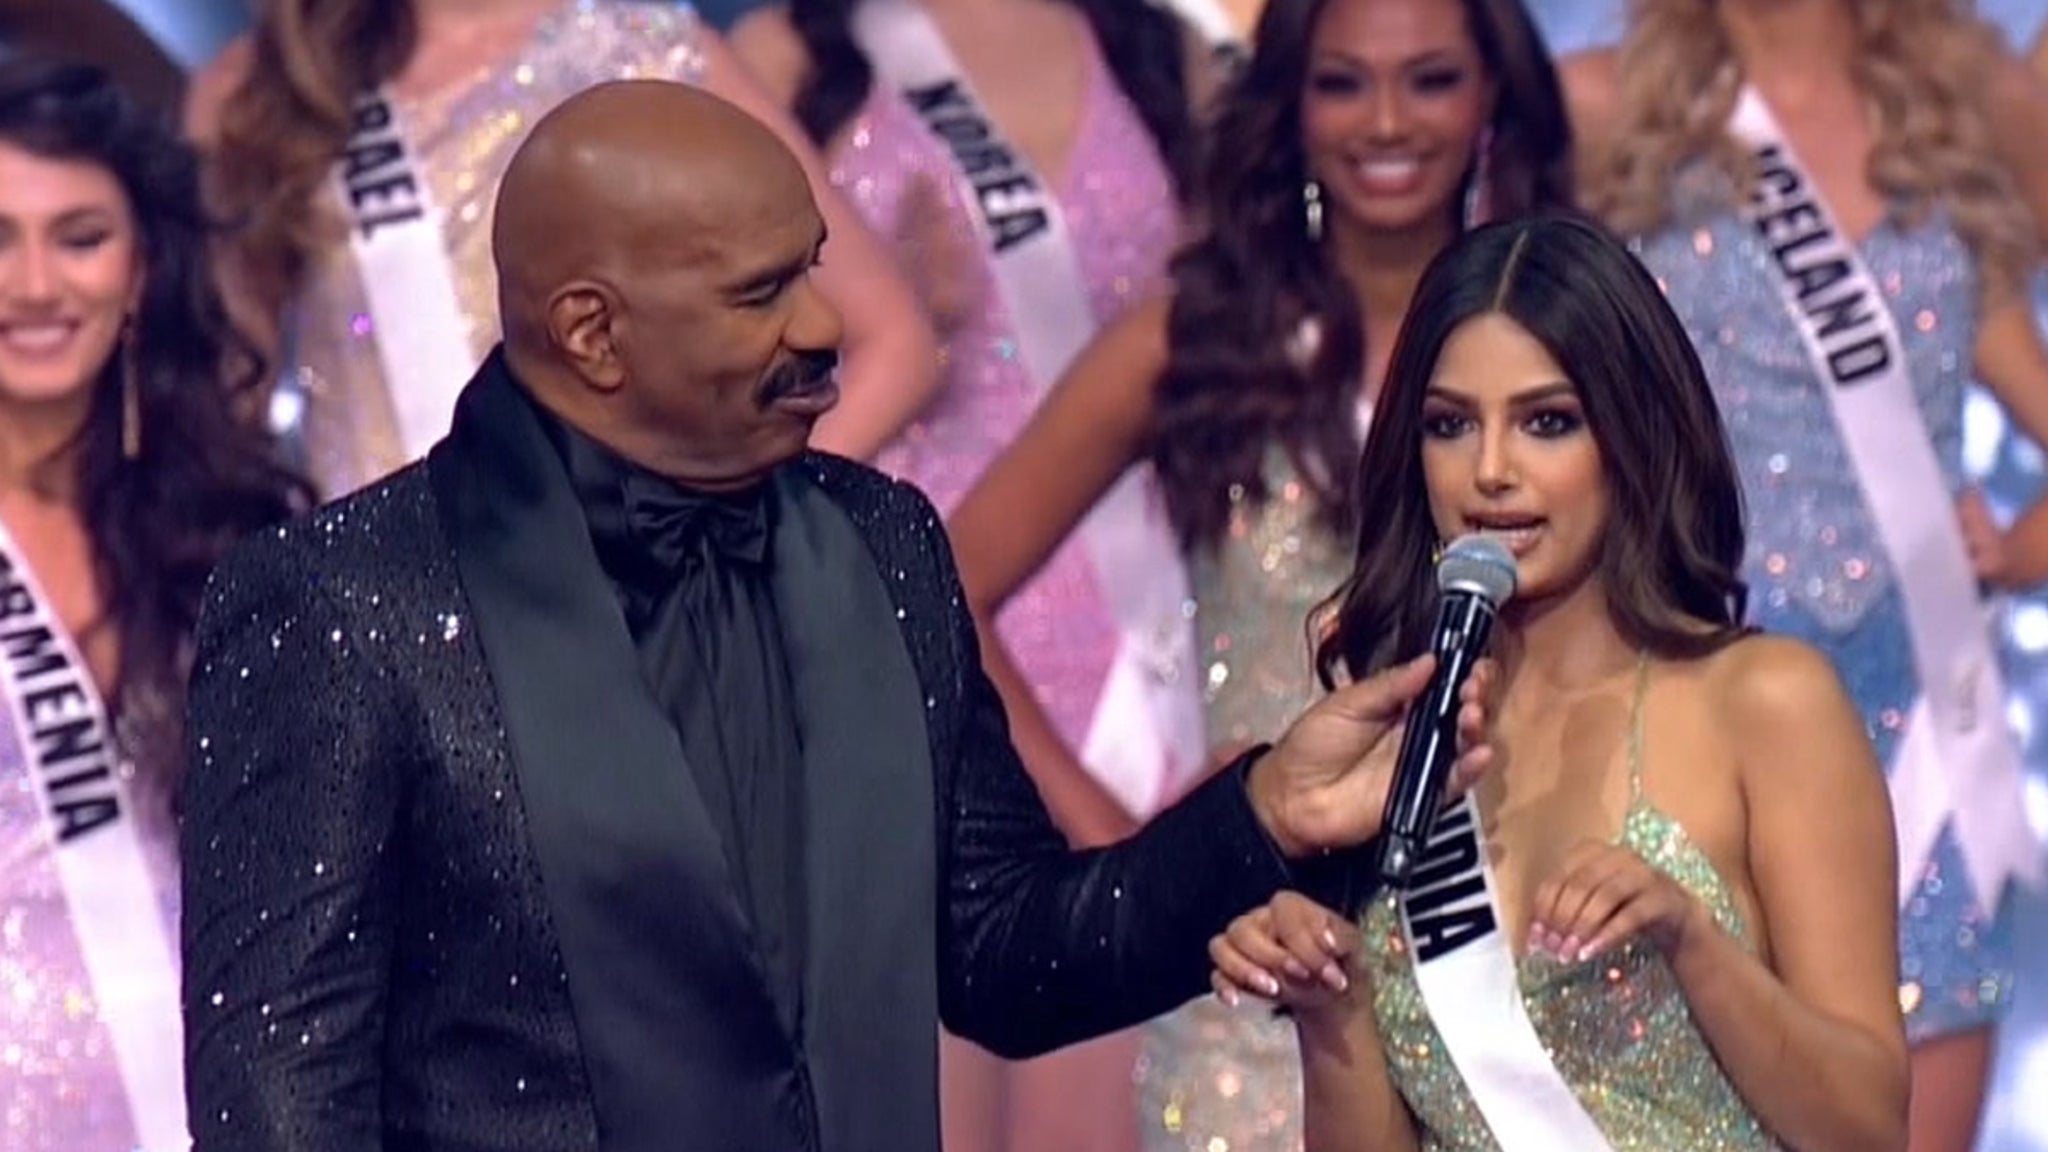 Does Steve Harvey Deserve Heat for His Miss Universe Gag with Miss India?